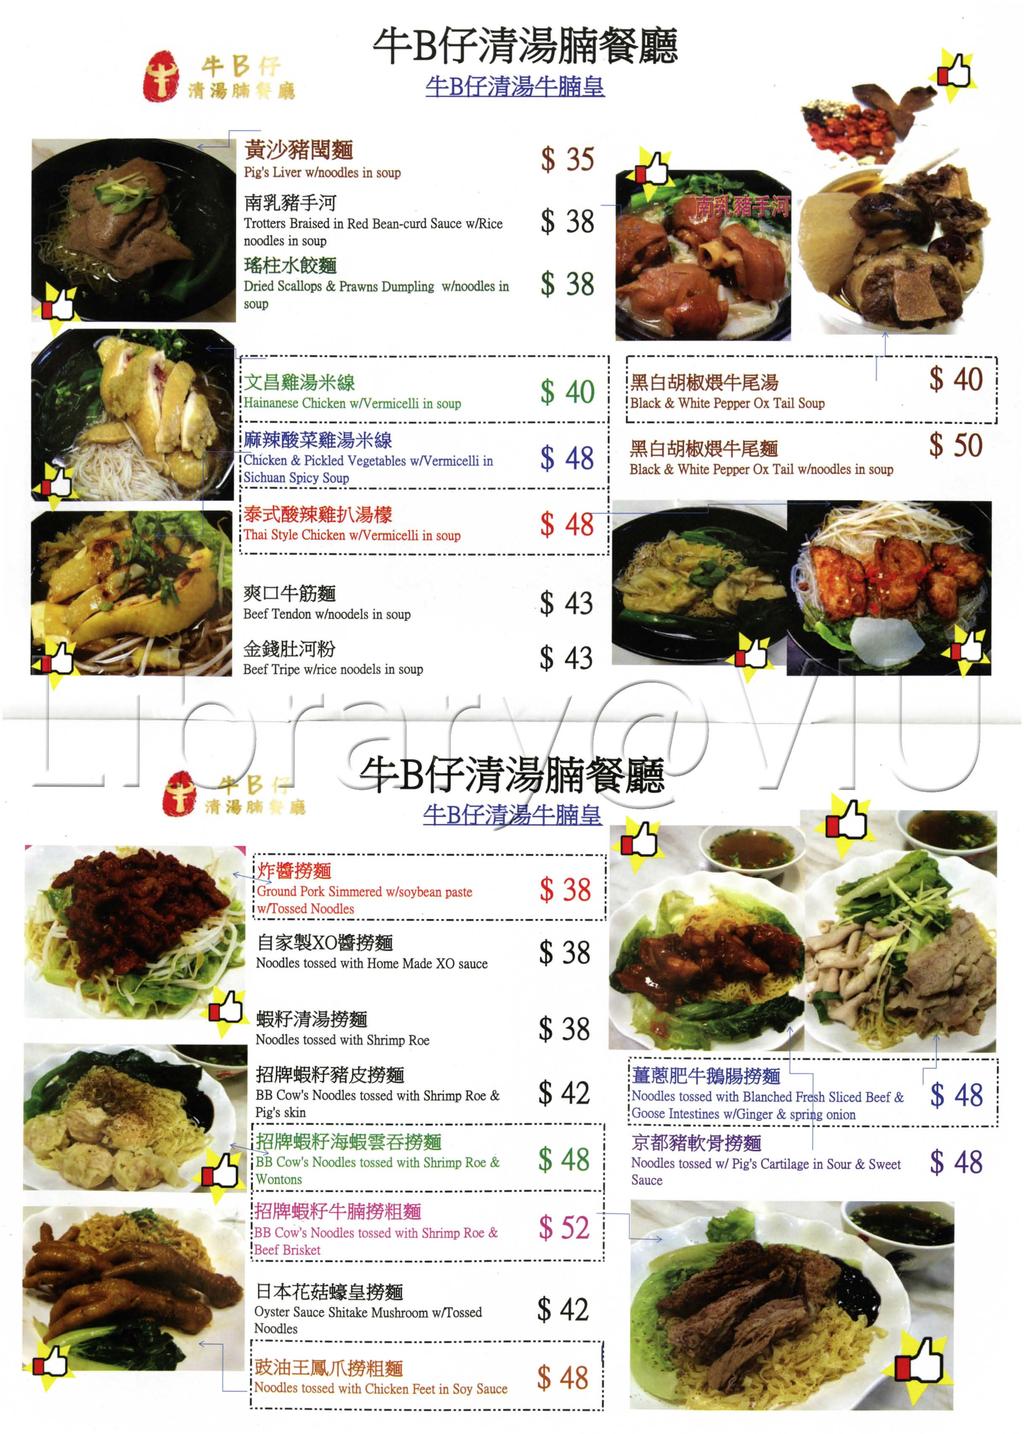 tt:bff)~~m 4BffM~4IDi~ Pig's Liver w/noodles in soup $ 35 Trotters Braised in Red Bean-curd Sauce wlrice $ 38 noodles in soup Dried Scallops & Prawns Dumpling w/noodles in $ 38 l )(~.